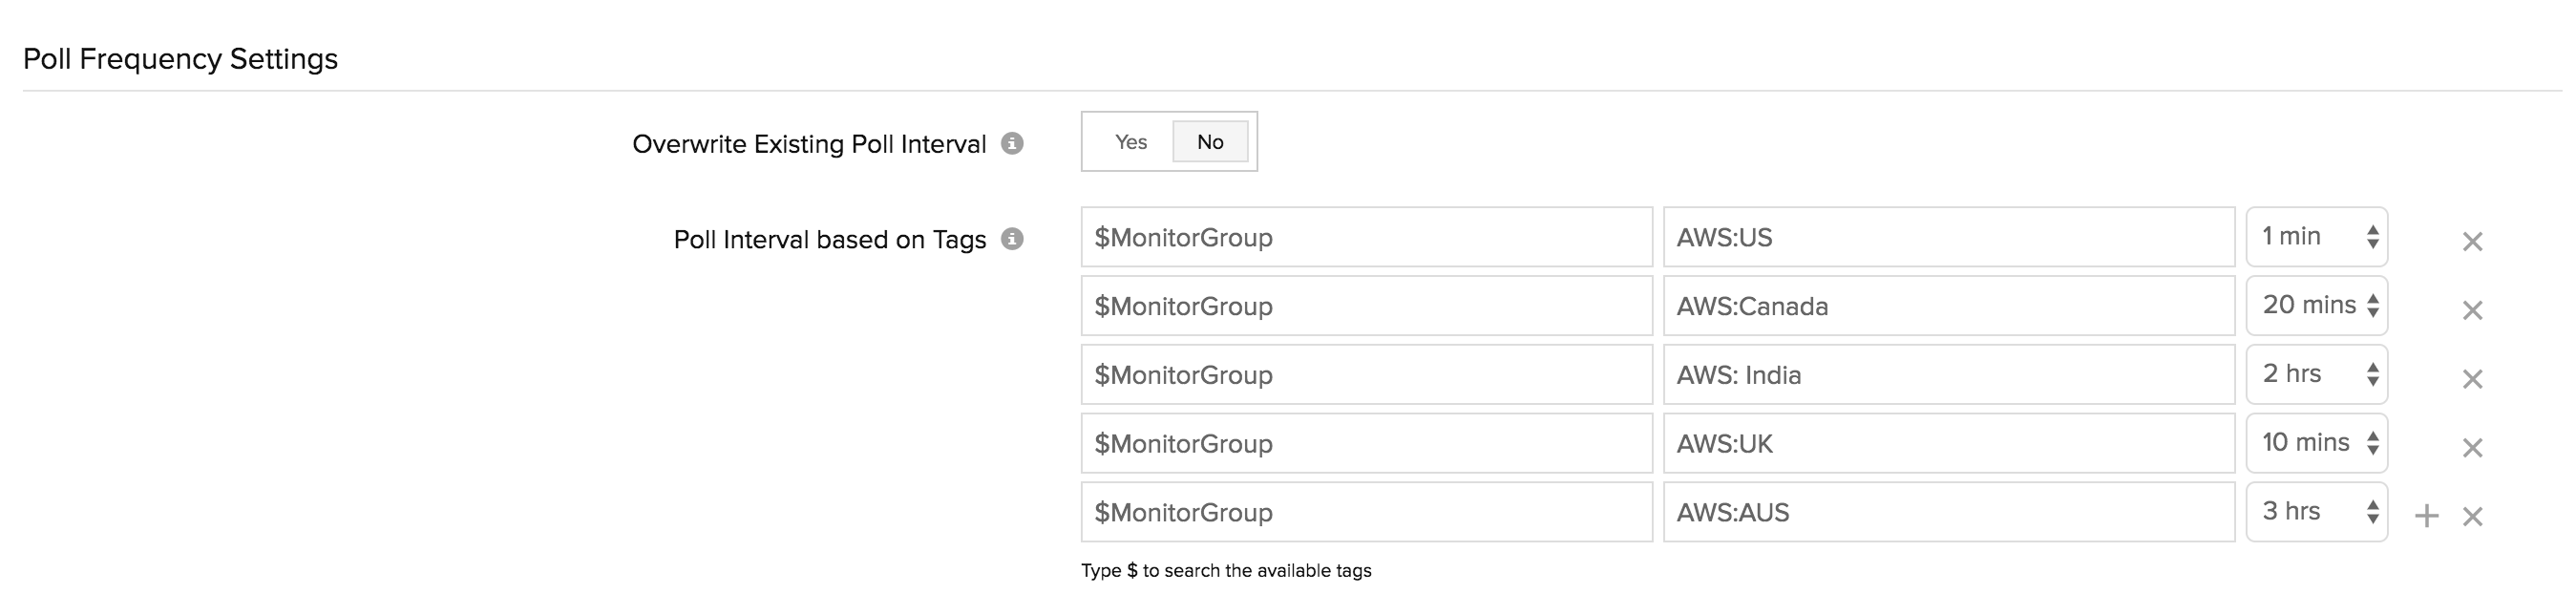 View and set the poll frequency in monitor groups